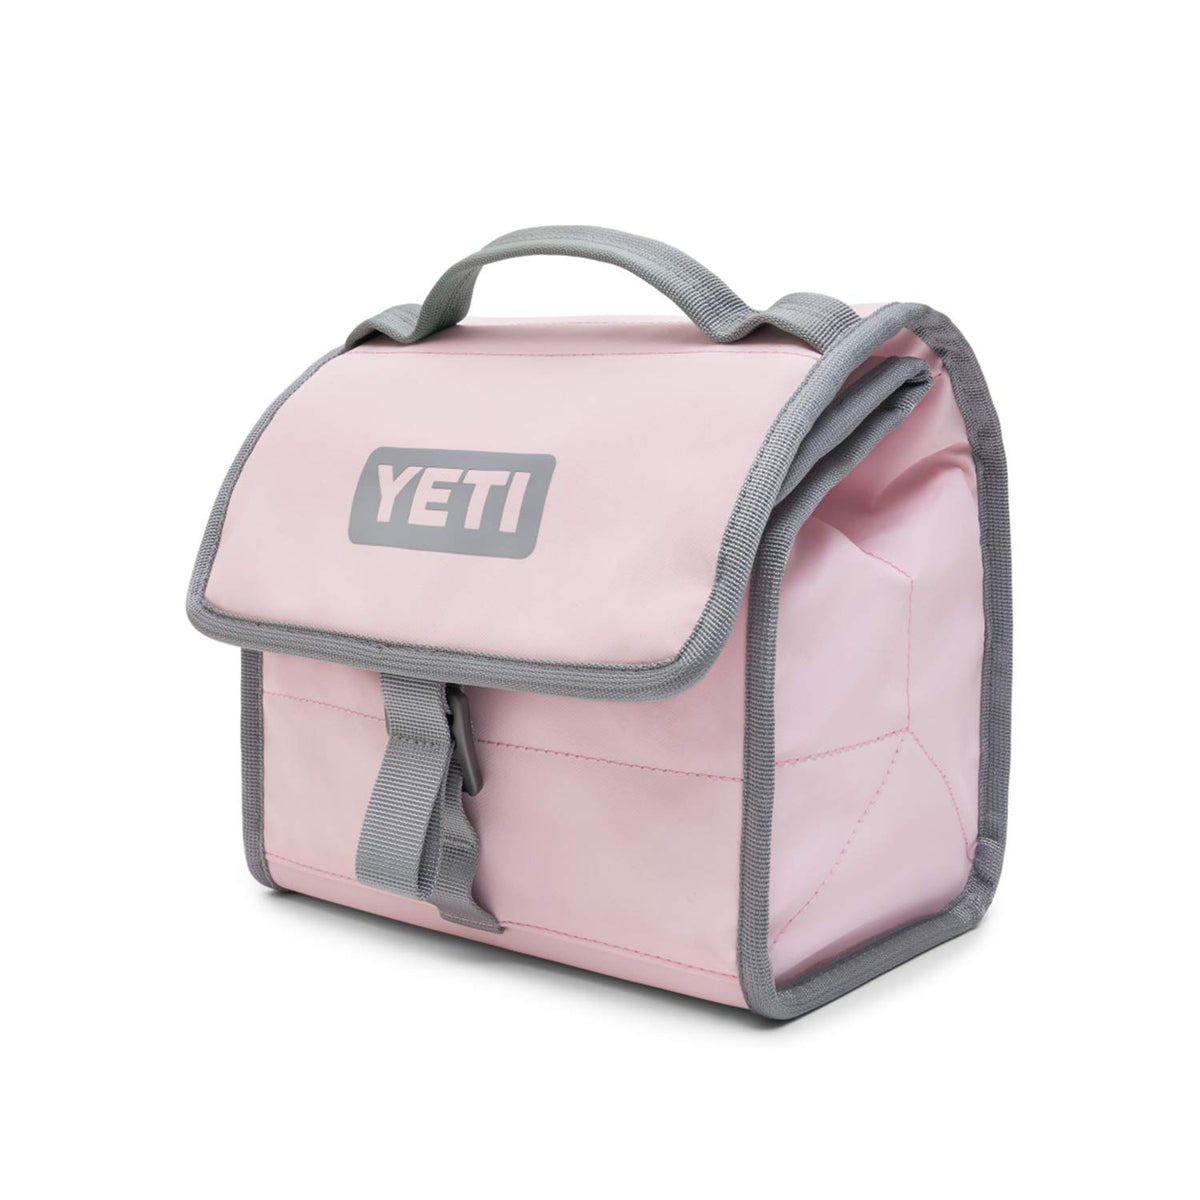 Yeti Daytrip Lunch Box Prickly Pear Pink NEW Discontinued Sold Out PPP